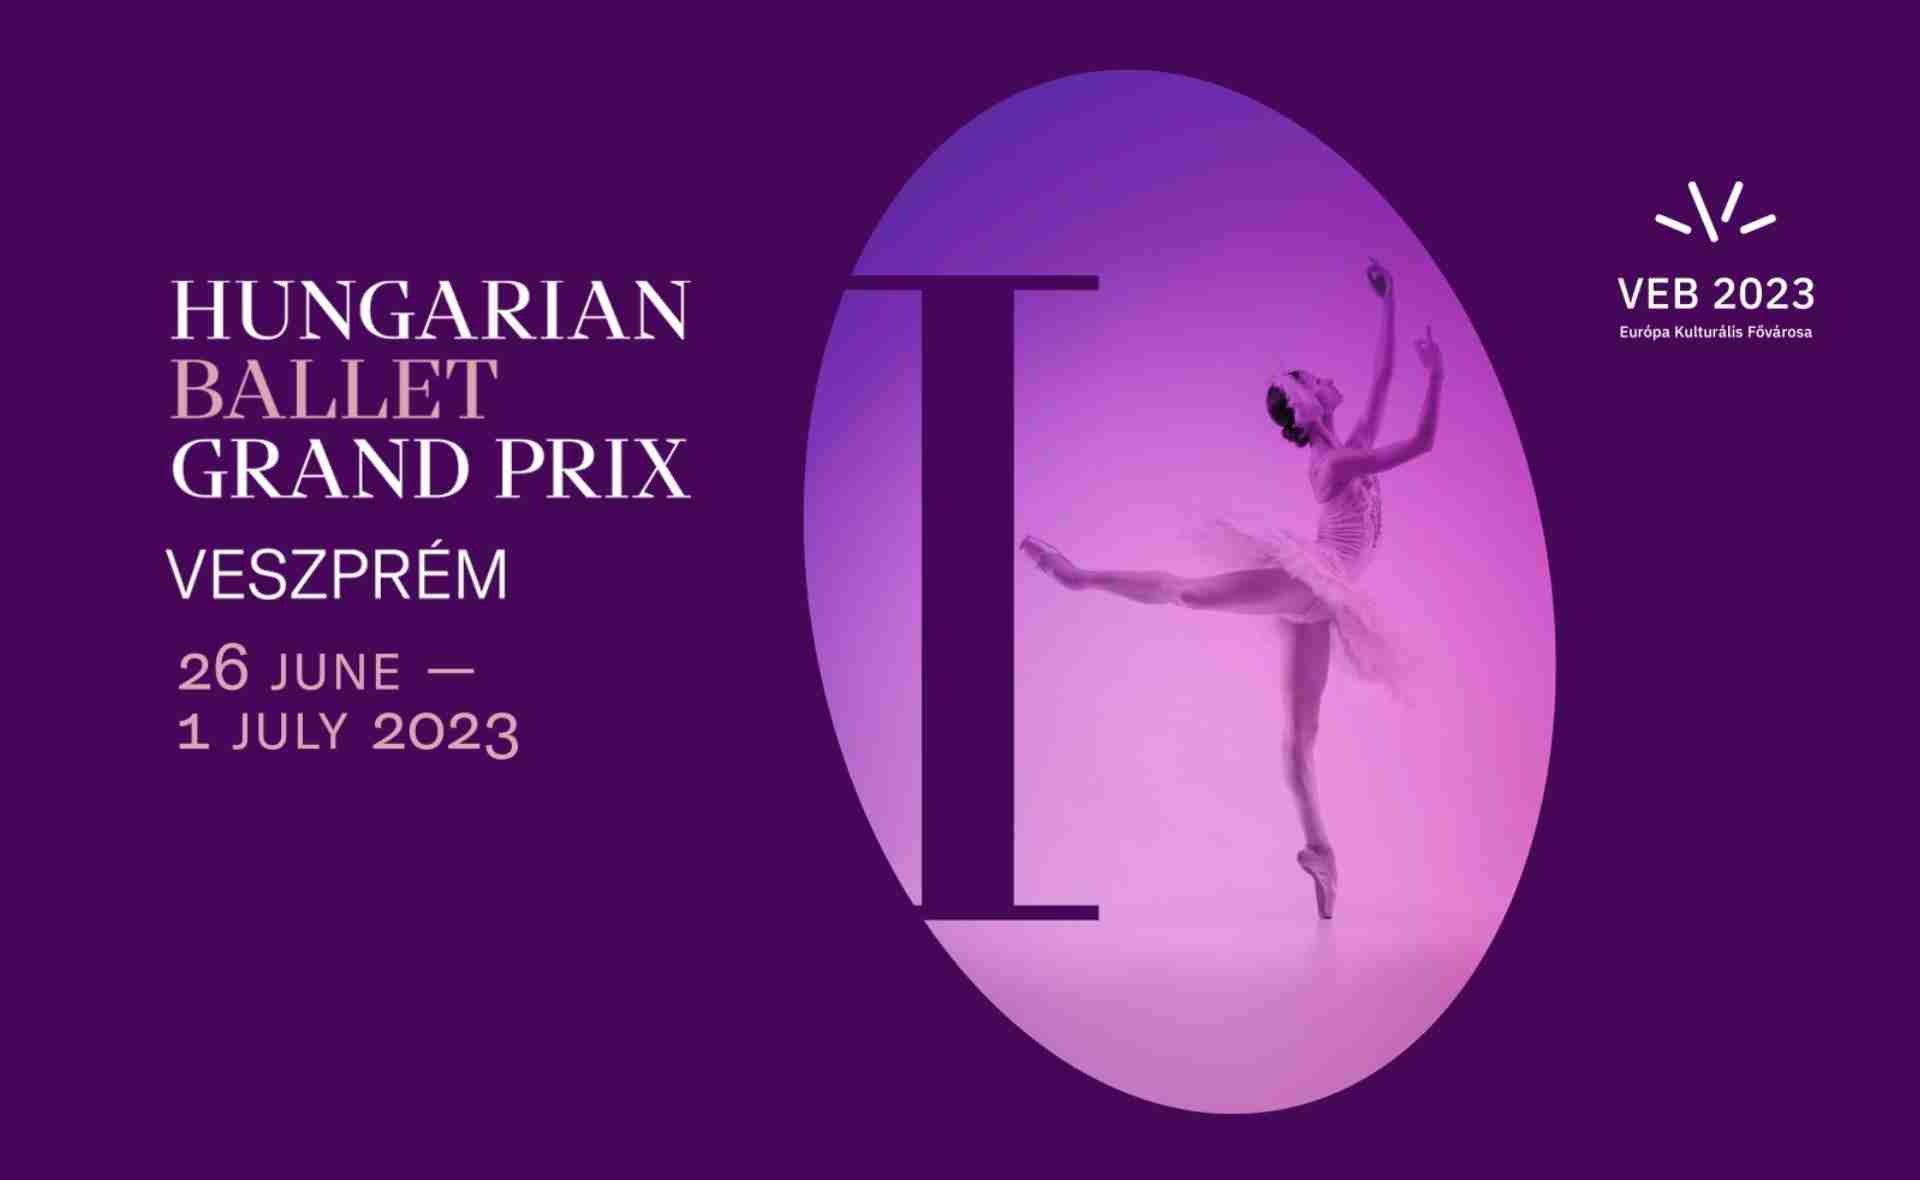 Registration is now open for the Hungarian Ballet Grand Prix